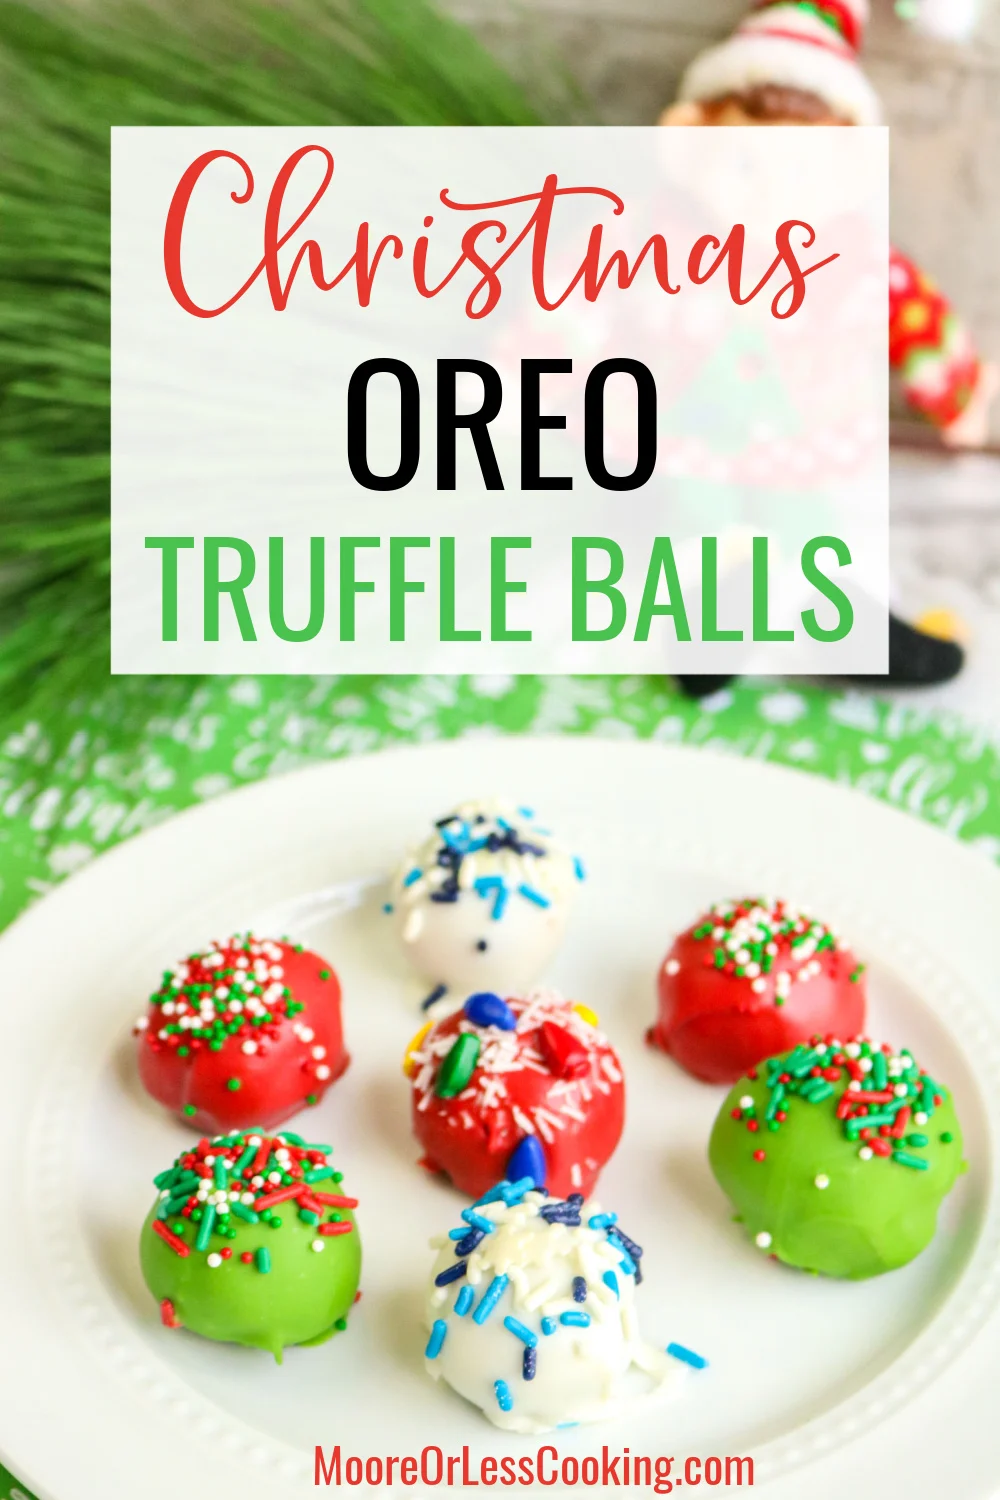 You'll love this scrumptious holiday Oreo Truffle Ball recipe that's dipped in chocolate and decorated with merry sprinkles for an easy and crowd-pleasing Christmas sweet treat. Whether you make an elegant white snowball truffle, a festive ugly Christmas sweater version, or a green and red Grinch-inspired treat, these Oreo Truffle Balls are the perfect no-bake dessert to celebrate the season. via @Mooreorlesscook